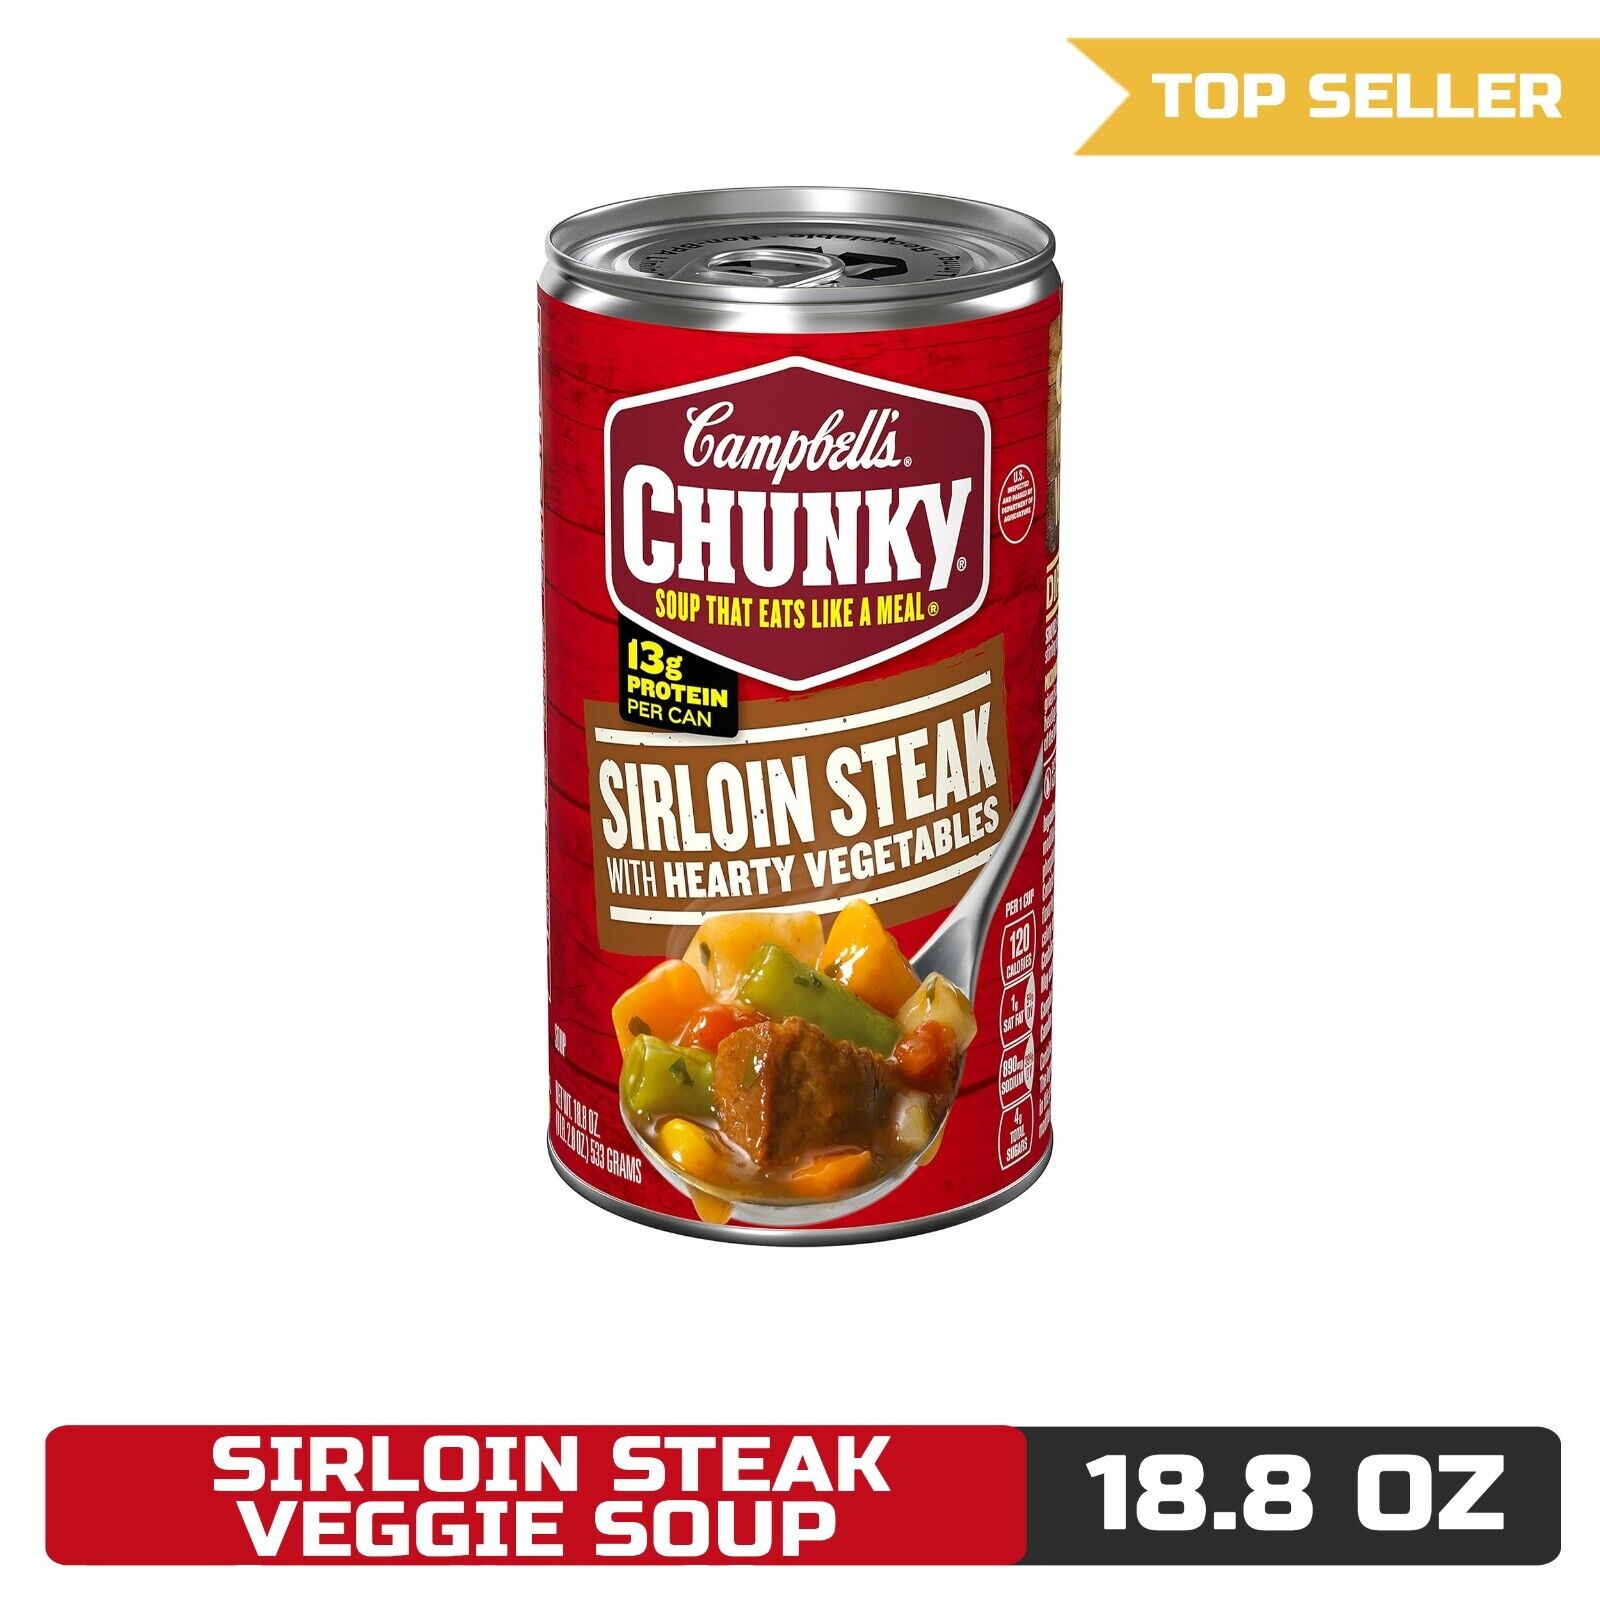 Campbell’s Chunky Sirloin Steak with Hearty Vegetables Soup, 18.8 Oz Can